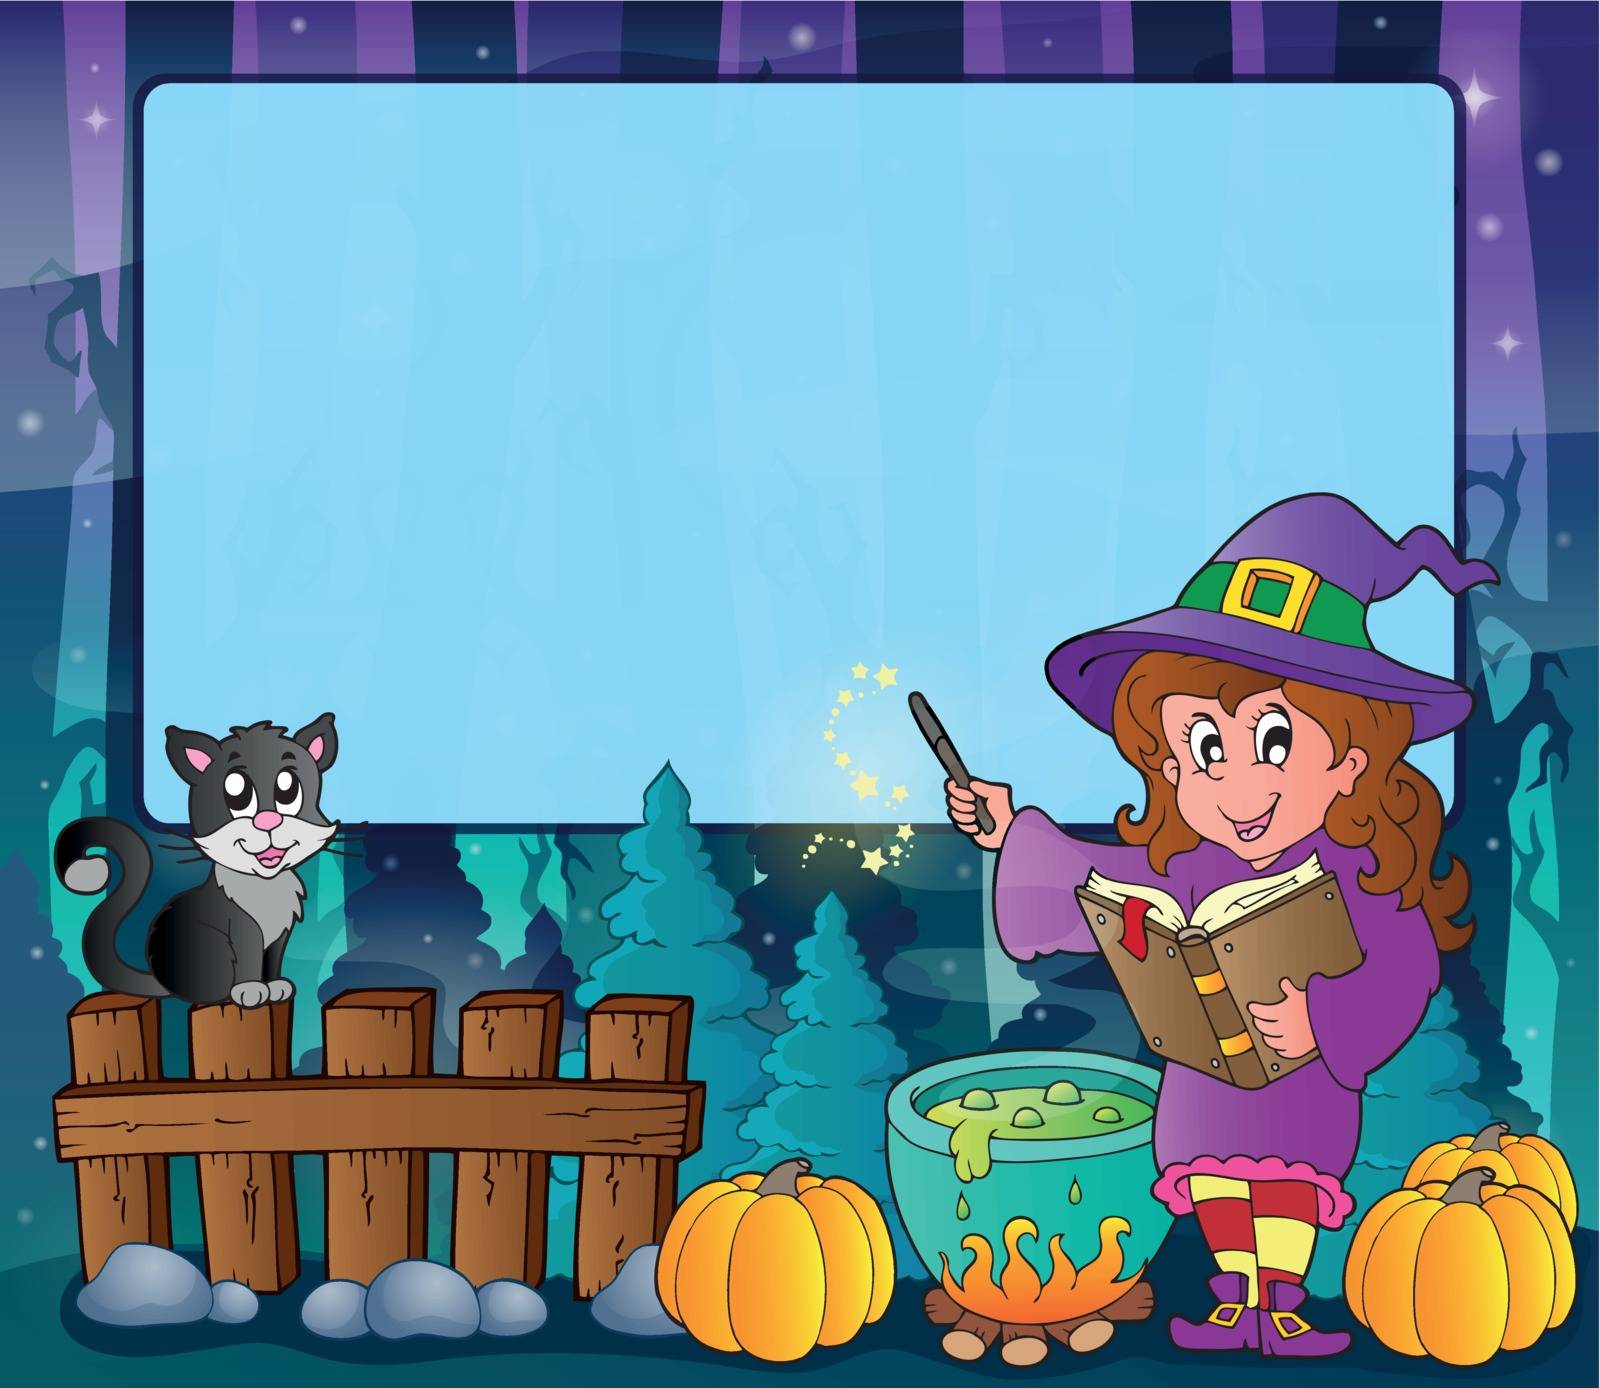 Mysterious forest Halloween frame 7 by clairev